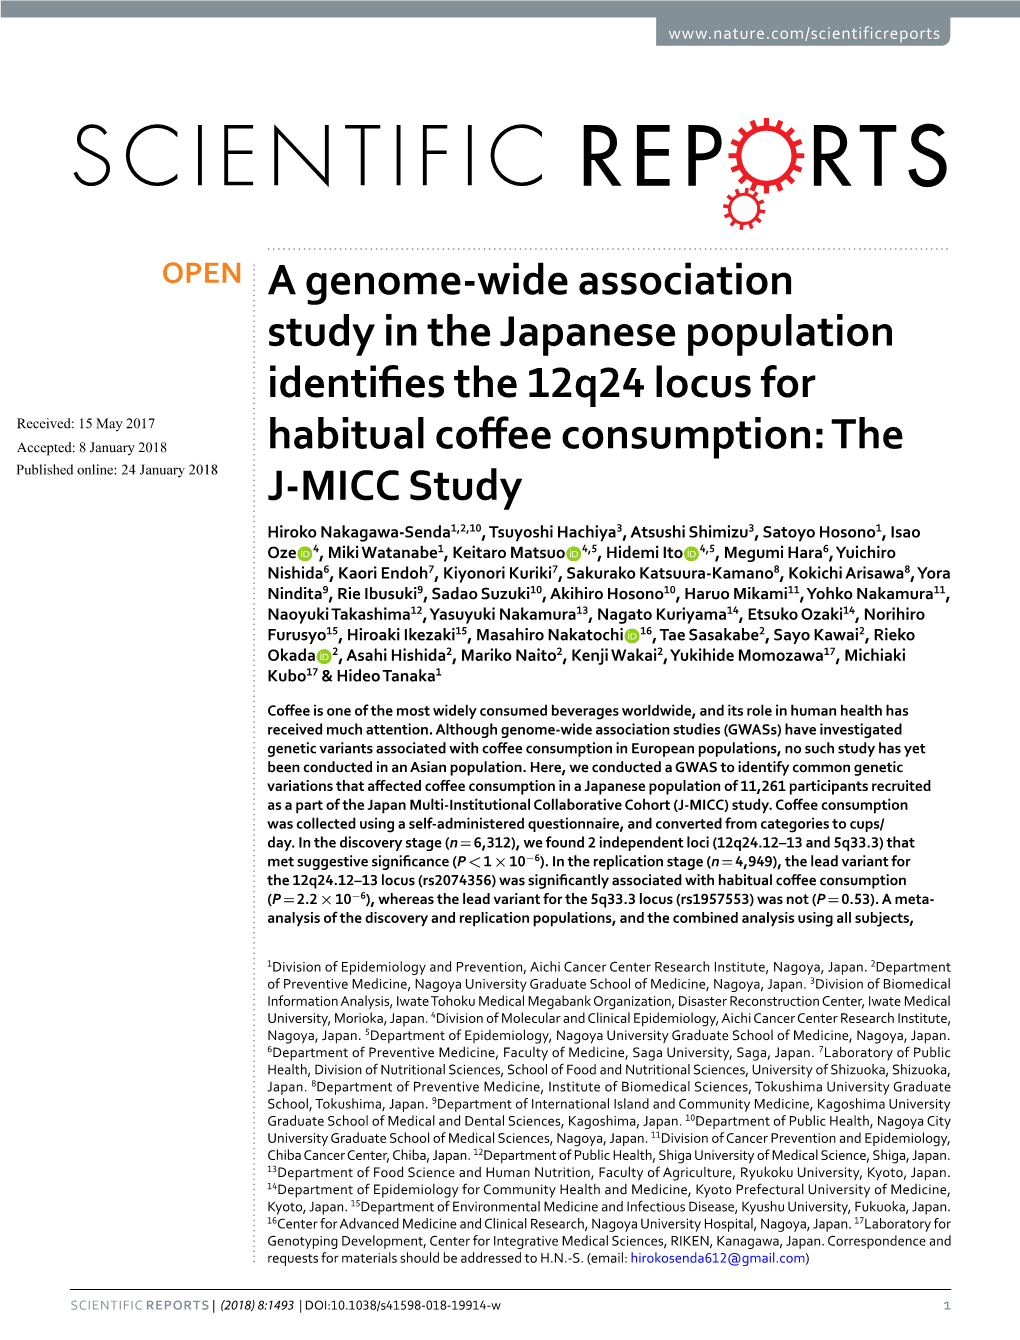 A Genome-Wide Association Study in the Japanese Population Identifies